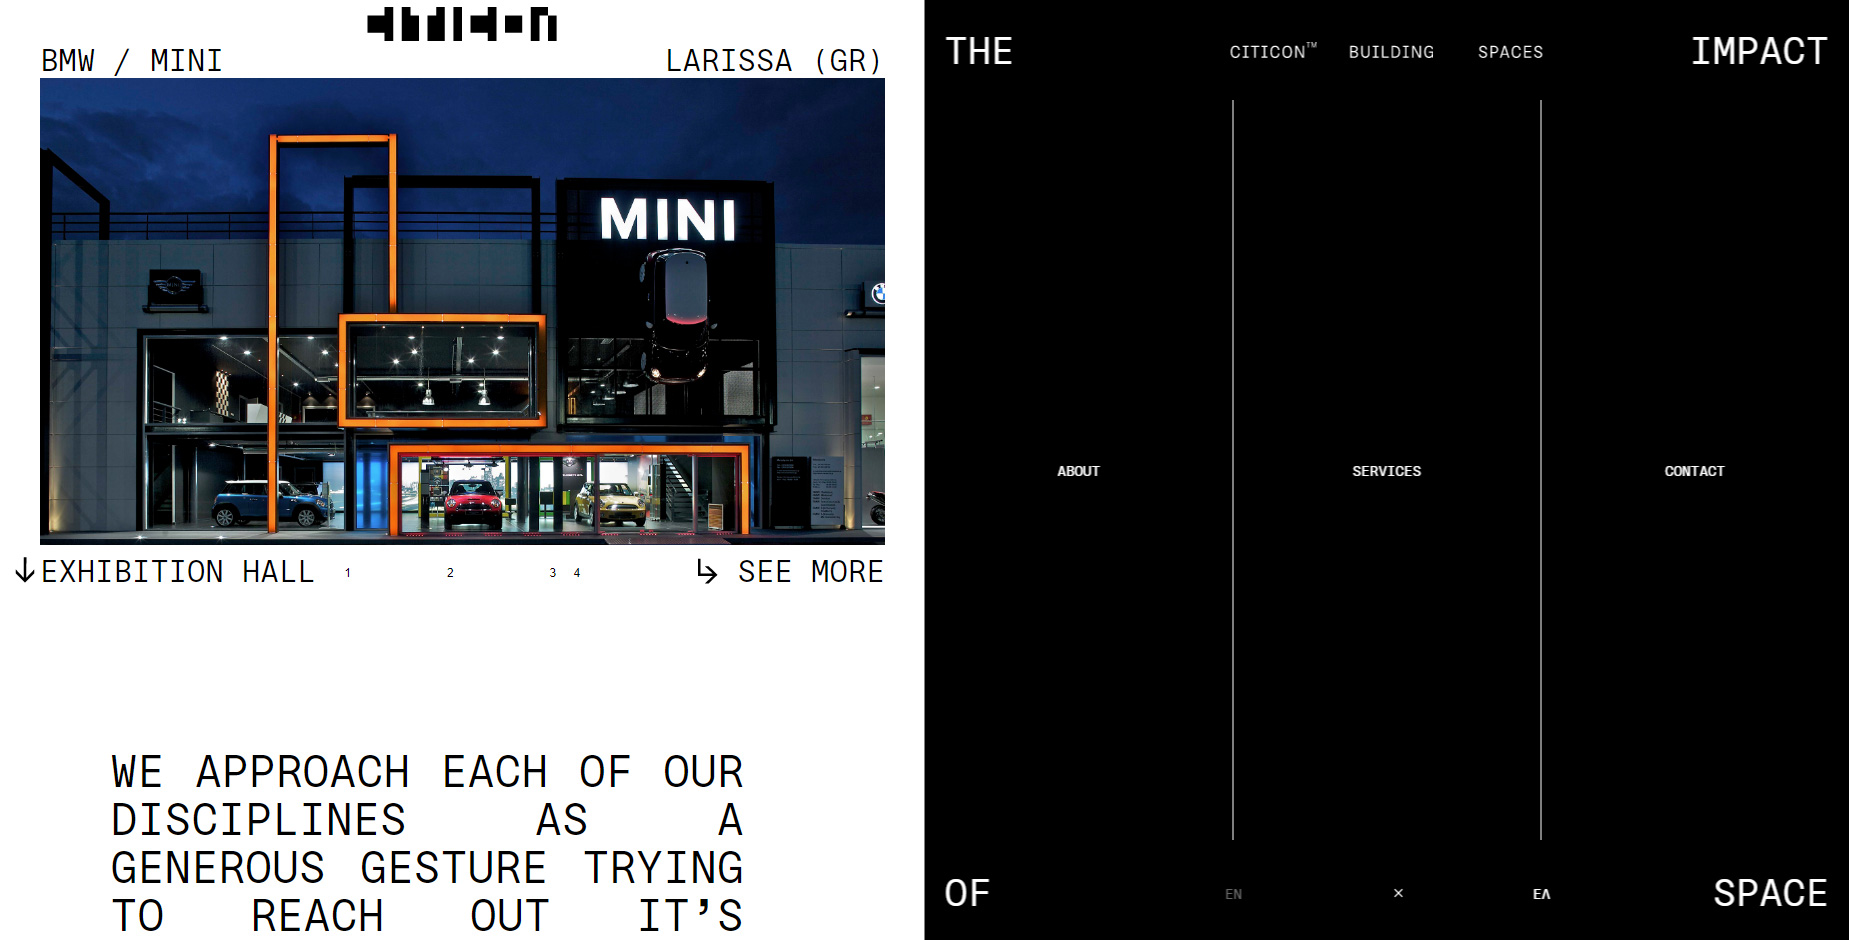 Citicon Building Spaces - Website of the Day